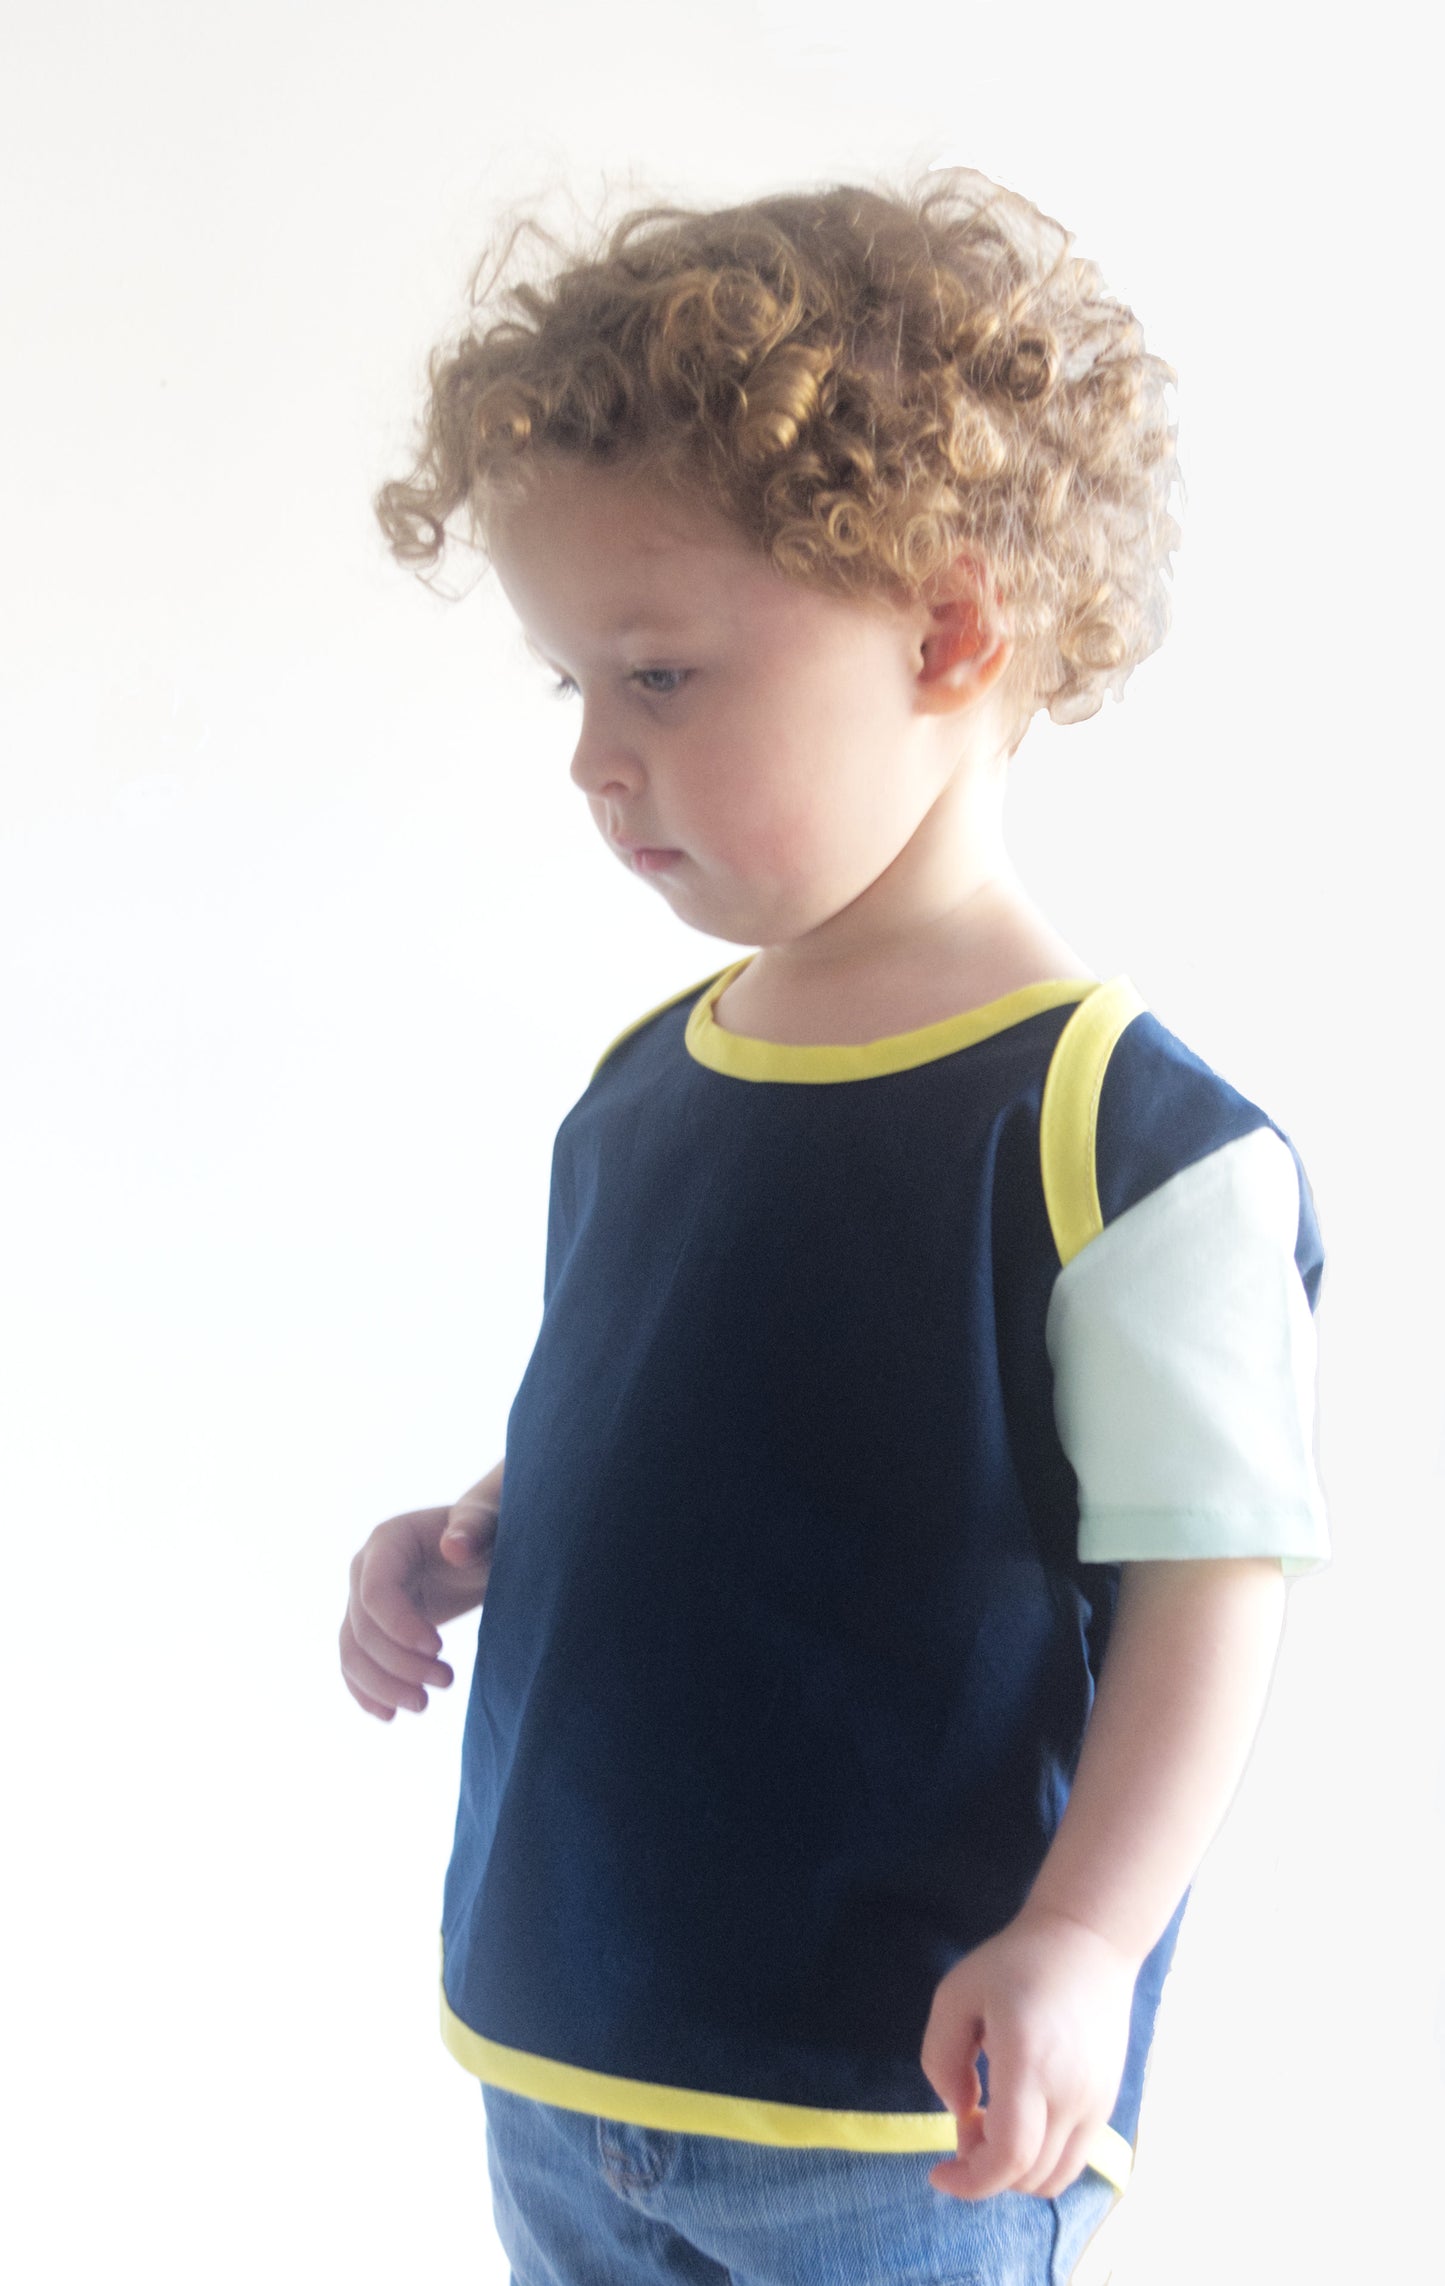 Baby Shirt Pattern - The Freebie for little Beebies